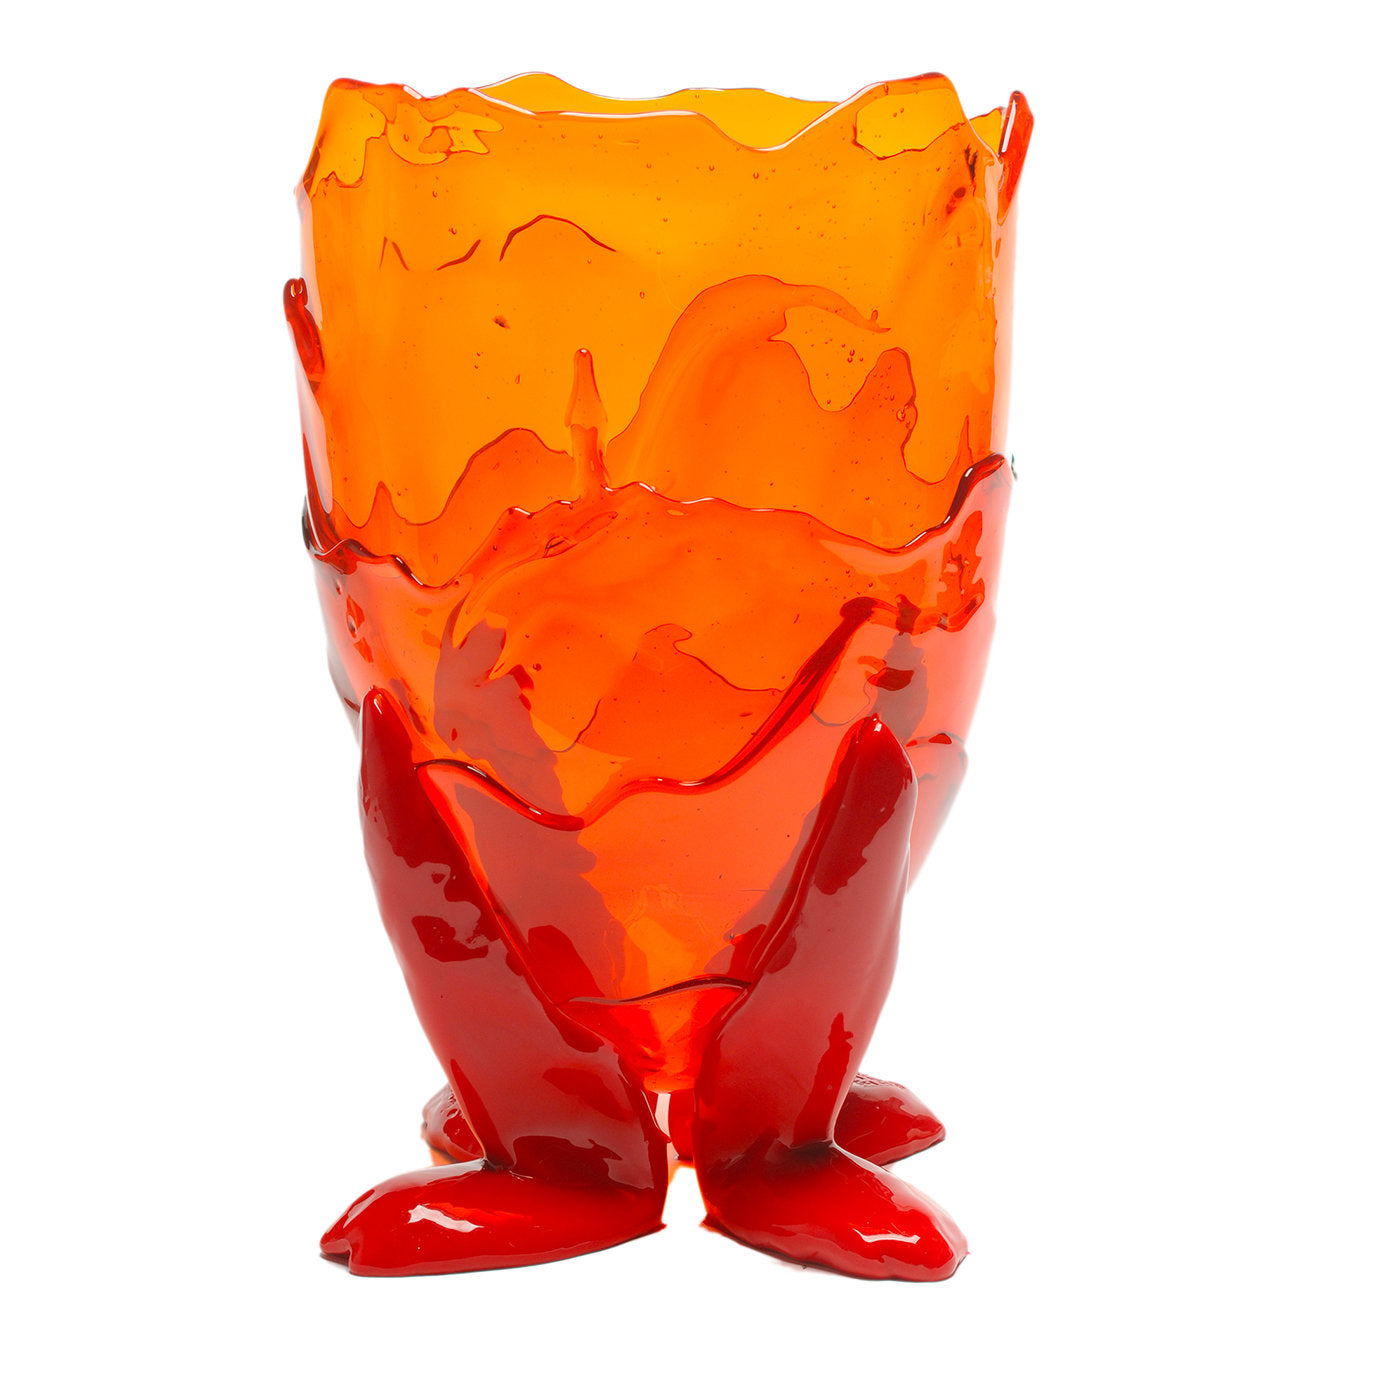 Clear Extracolor Large Vase By Gaetano Pesce - Alternative view 1